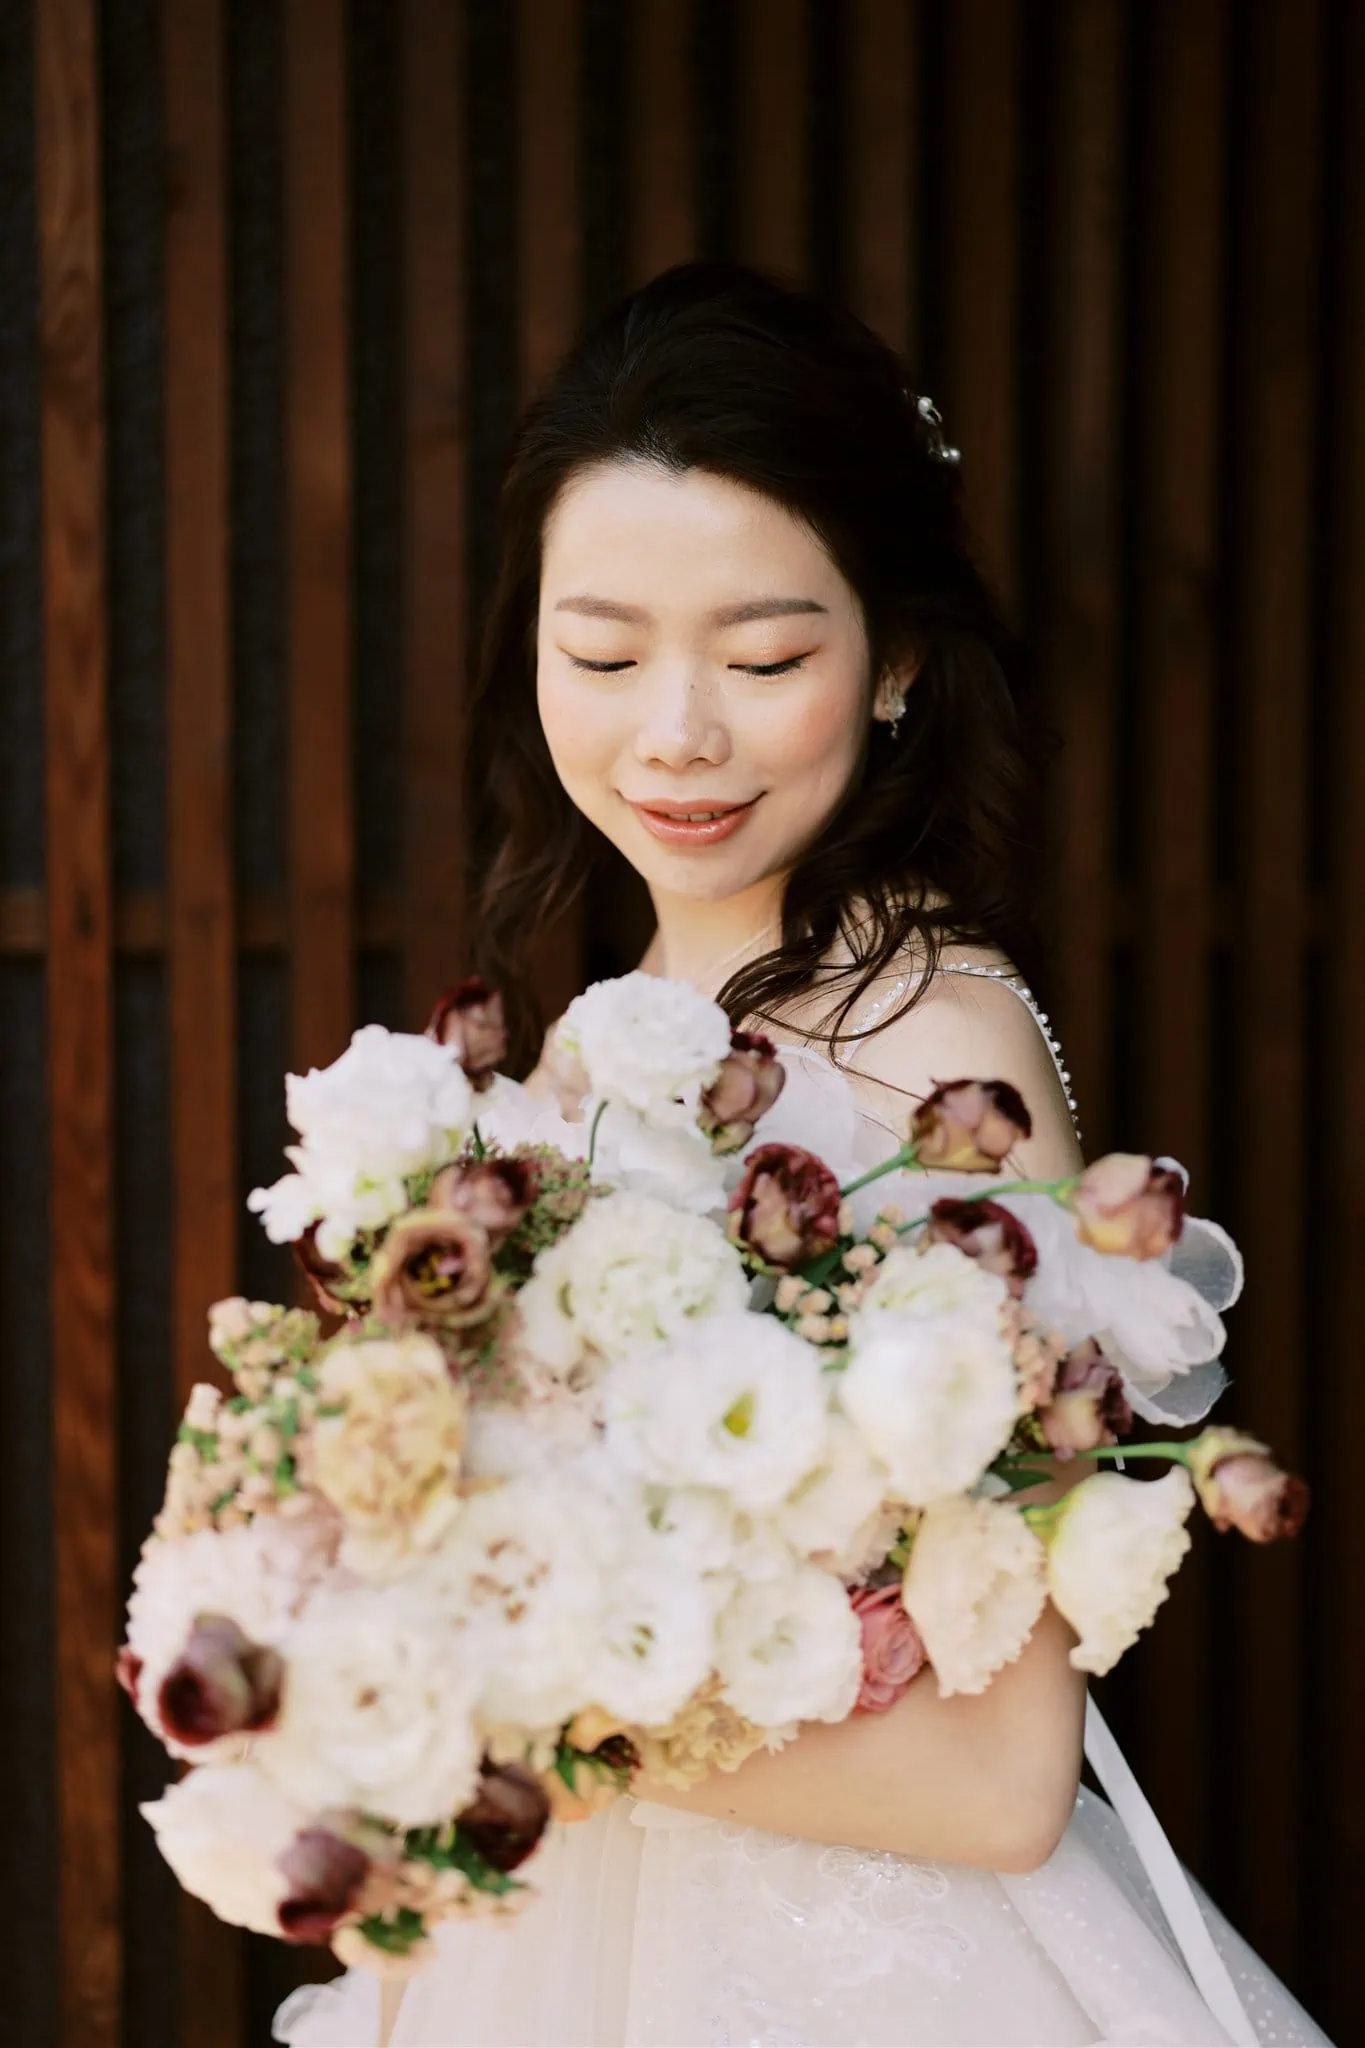 Kyoto Tokyo Japan Elopement Wedding Photographer, Planner & Videographer | A Japan elopement photographer captures a bride holding a bouquet of flowers in front of a wooden wall.